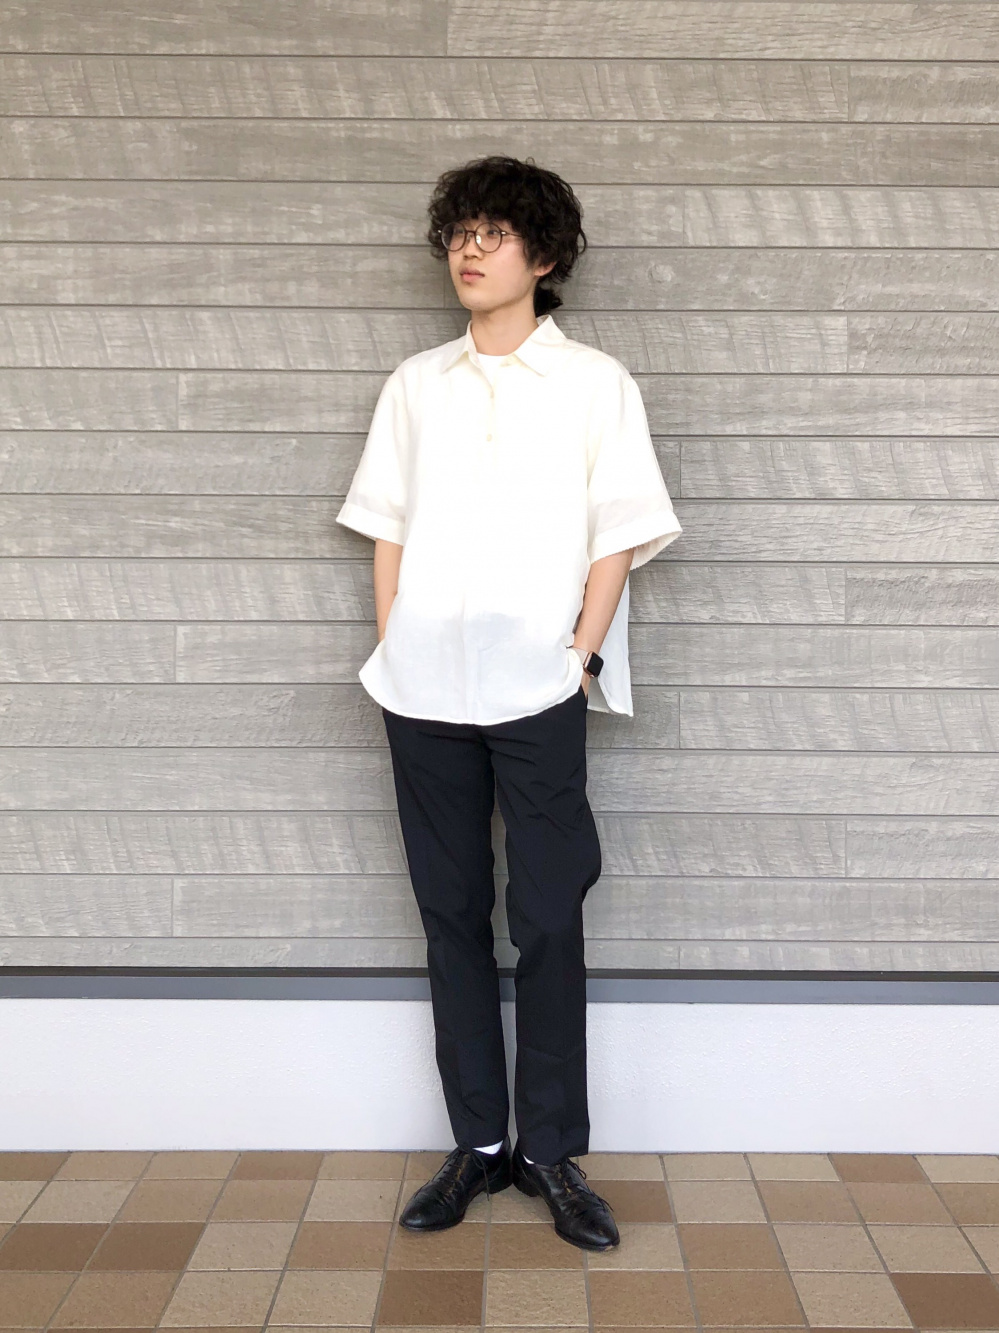 Check styling ideas for「Dry Pique Short-Sleeve Polo Shirt、AirSense Pants  (Ultra Light Pants) (Cotton Like)」